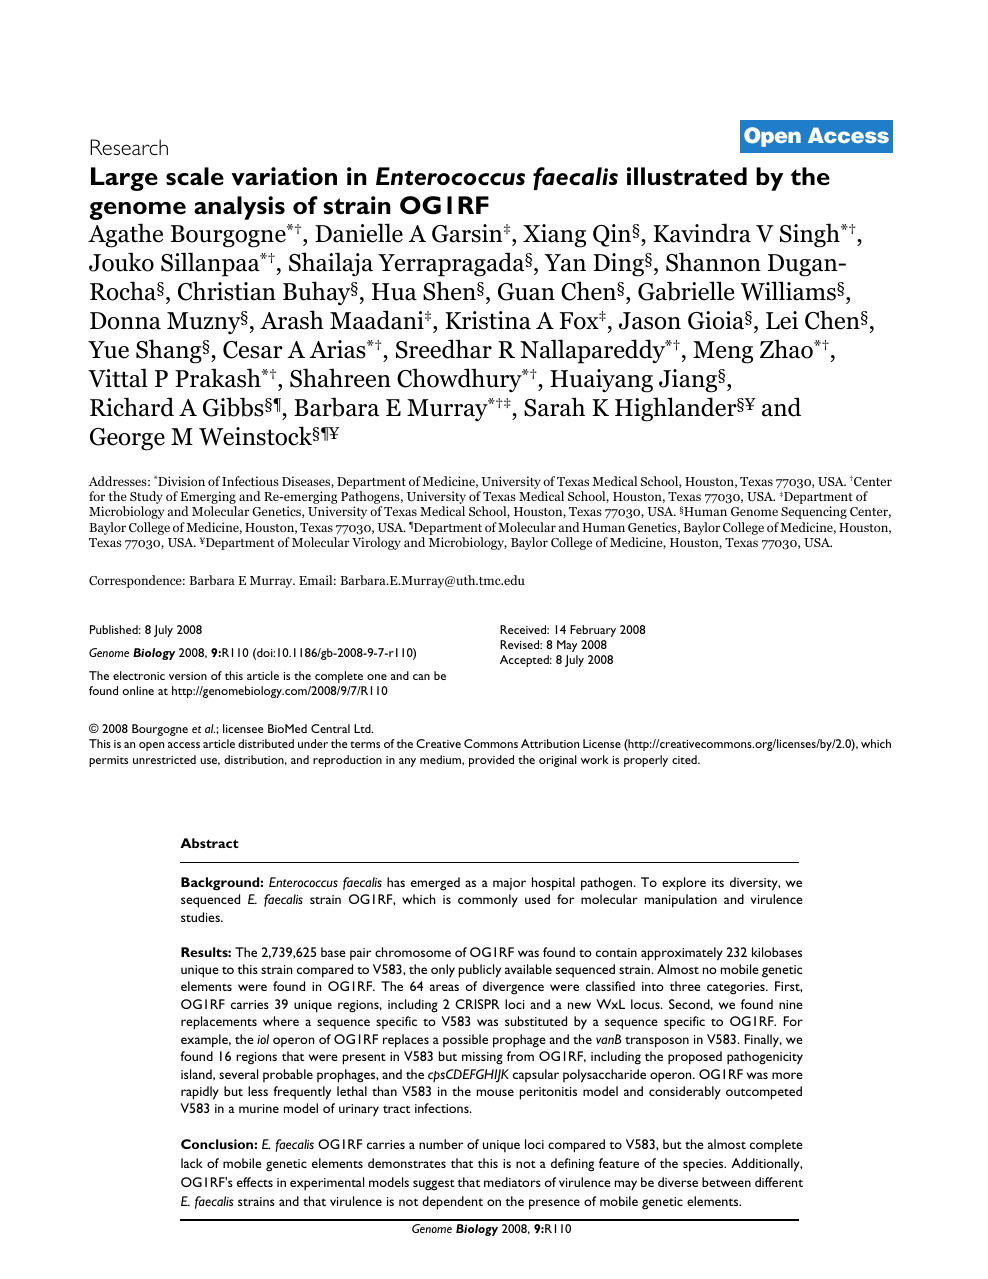 Large Scale Variation In Enterococcus Faecalis Illustrated By The Genome Analysis Of Strain Og1rf Topic Of Research Paper In Biological Sciences Download Scholarly Article Pdf And Read For Free On Cyberleninka